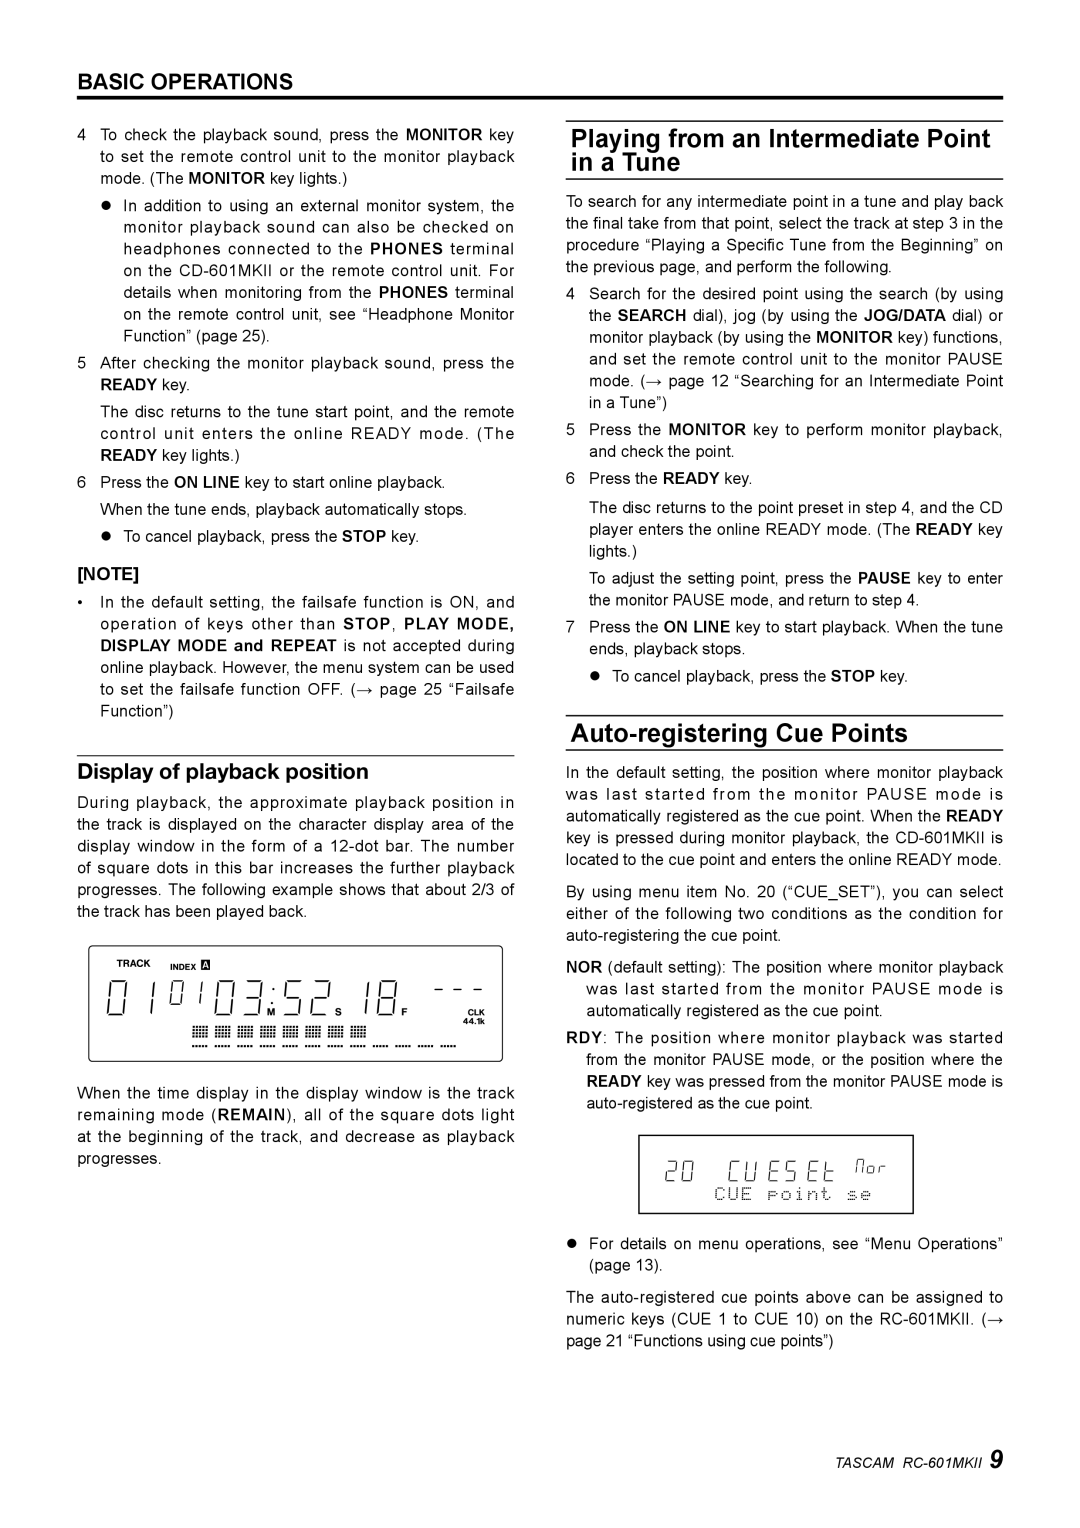 Tascam RC-601mkII owner manual Playing from an Intermediate Point in a Tune, Auto-registering Cue Points, Basic Operations 